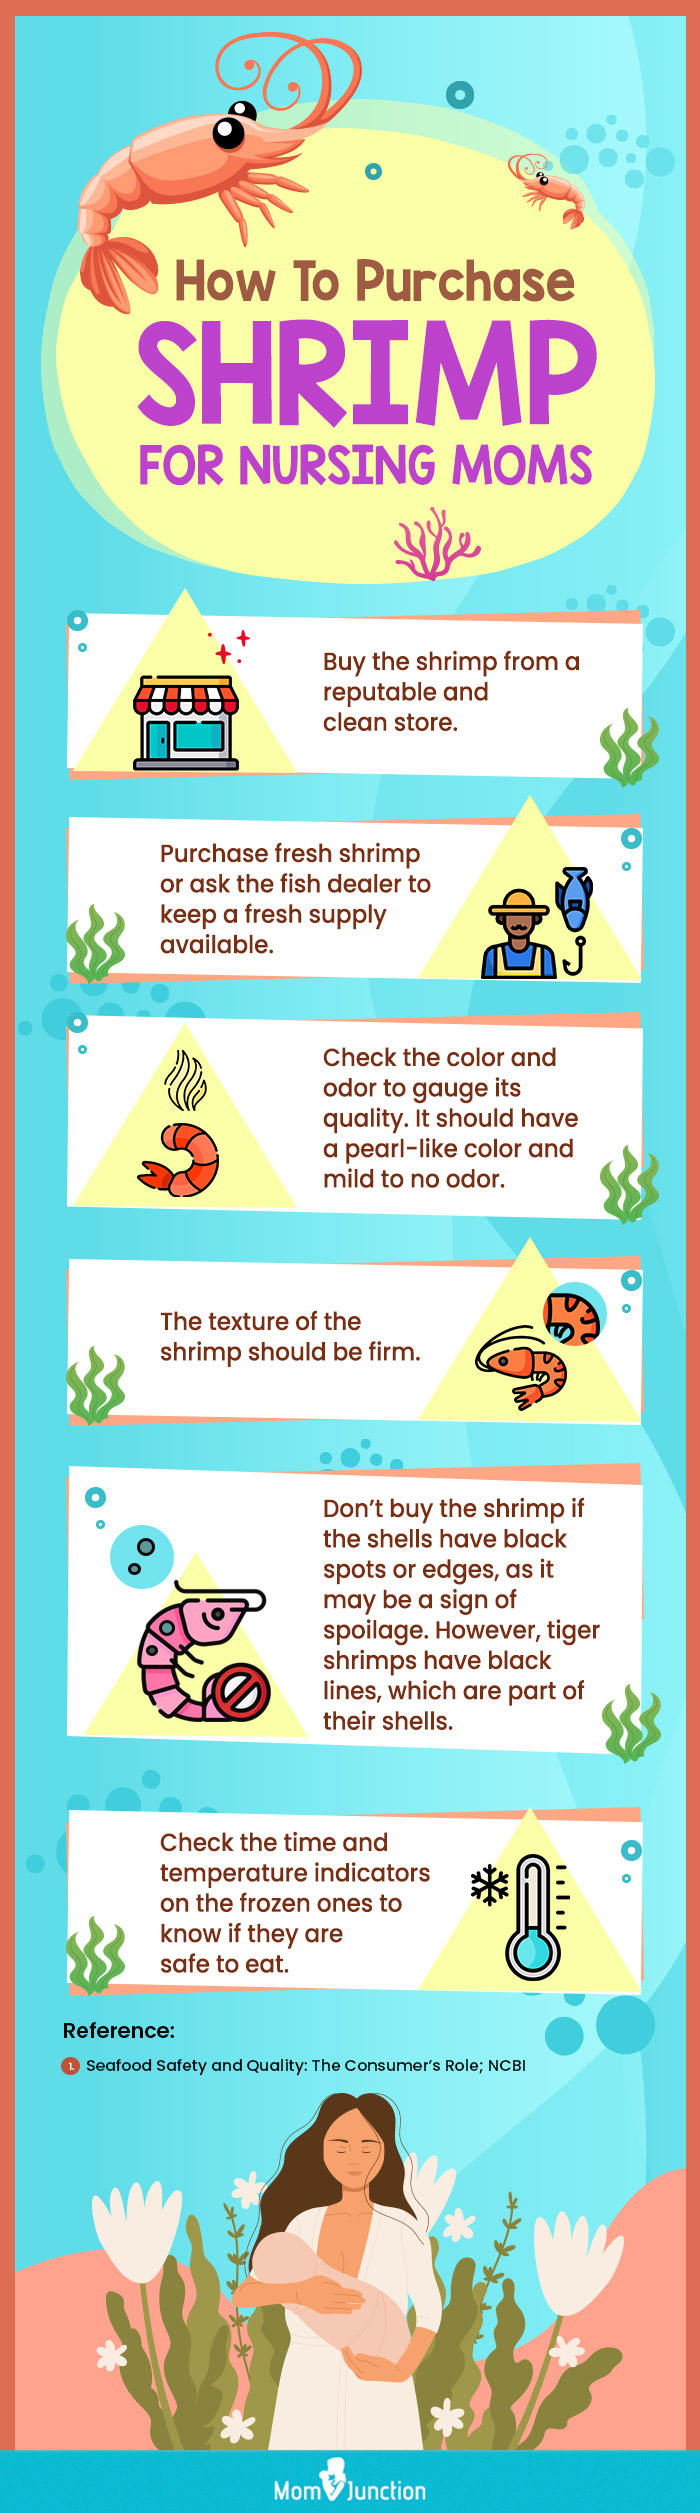 how to purchase shrimp for nursing moms (infographic)